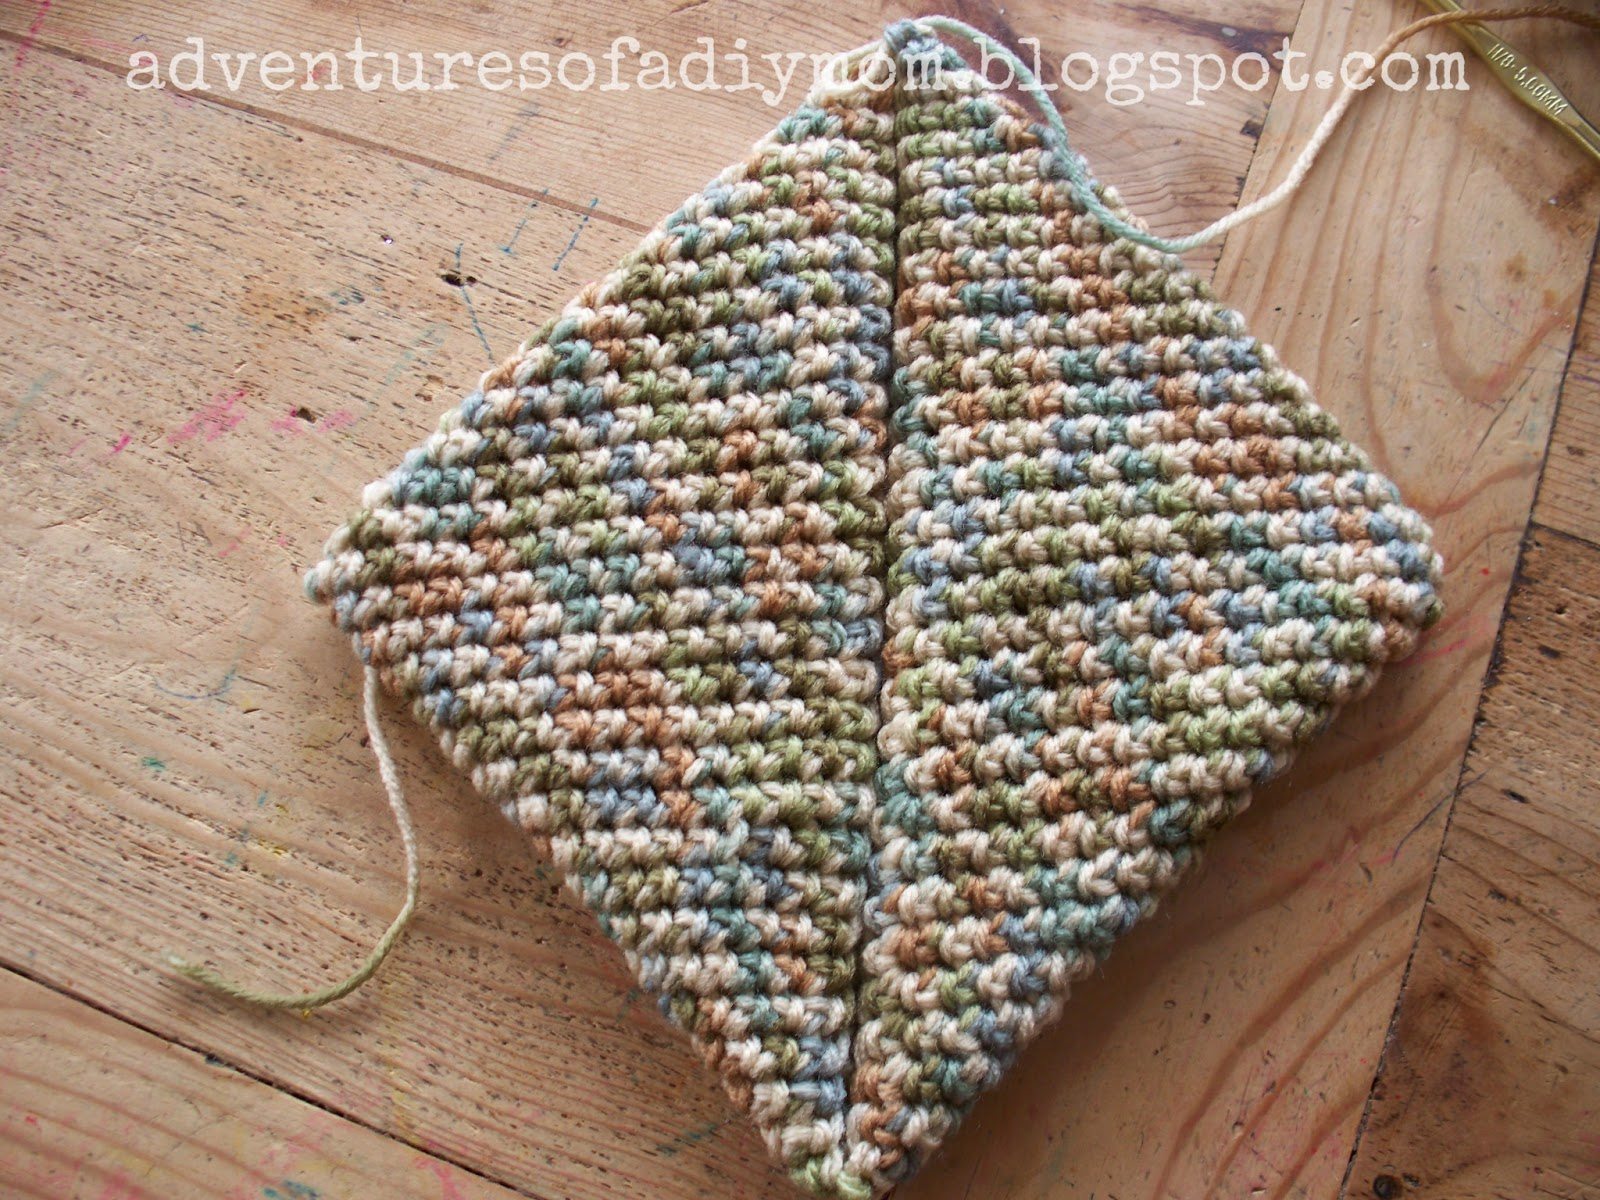 Free Crochet Potholder Patterns How To Crochet A Hotpad Super Easy Version Adventures Of A Diy Mom